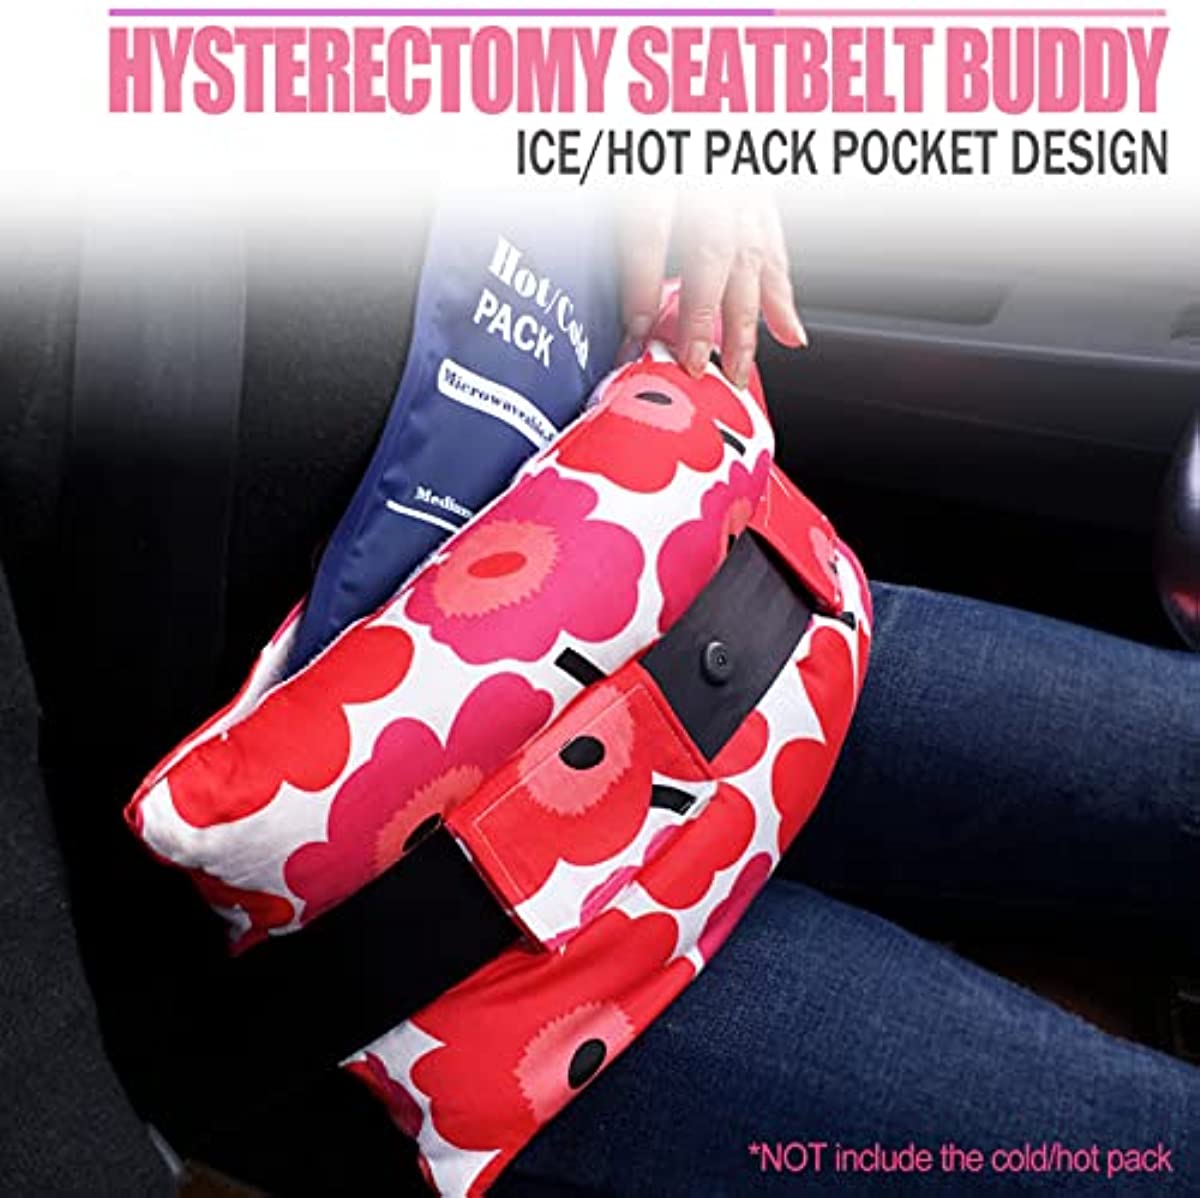 Hysterectomy Pillow Abdominal Post Surgery Pillows with Pocket Comfort for Ice Heat Packs Tummy Tuck Belly Incision Recovery Seatbelt Gifts Women Patients